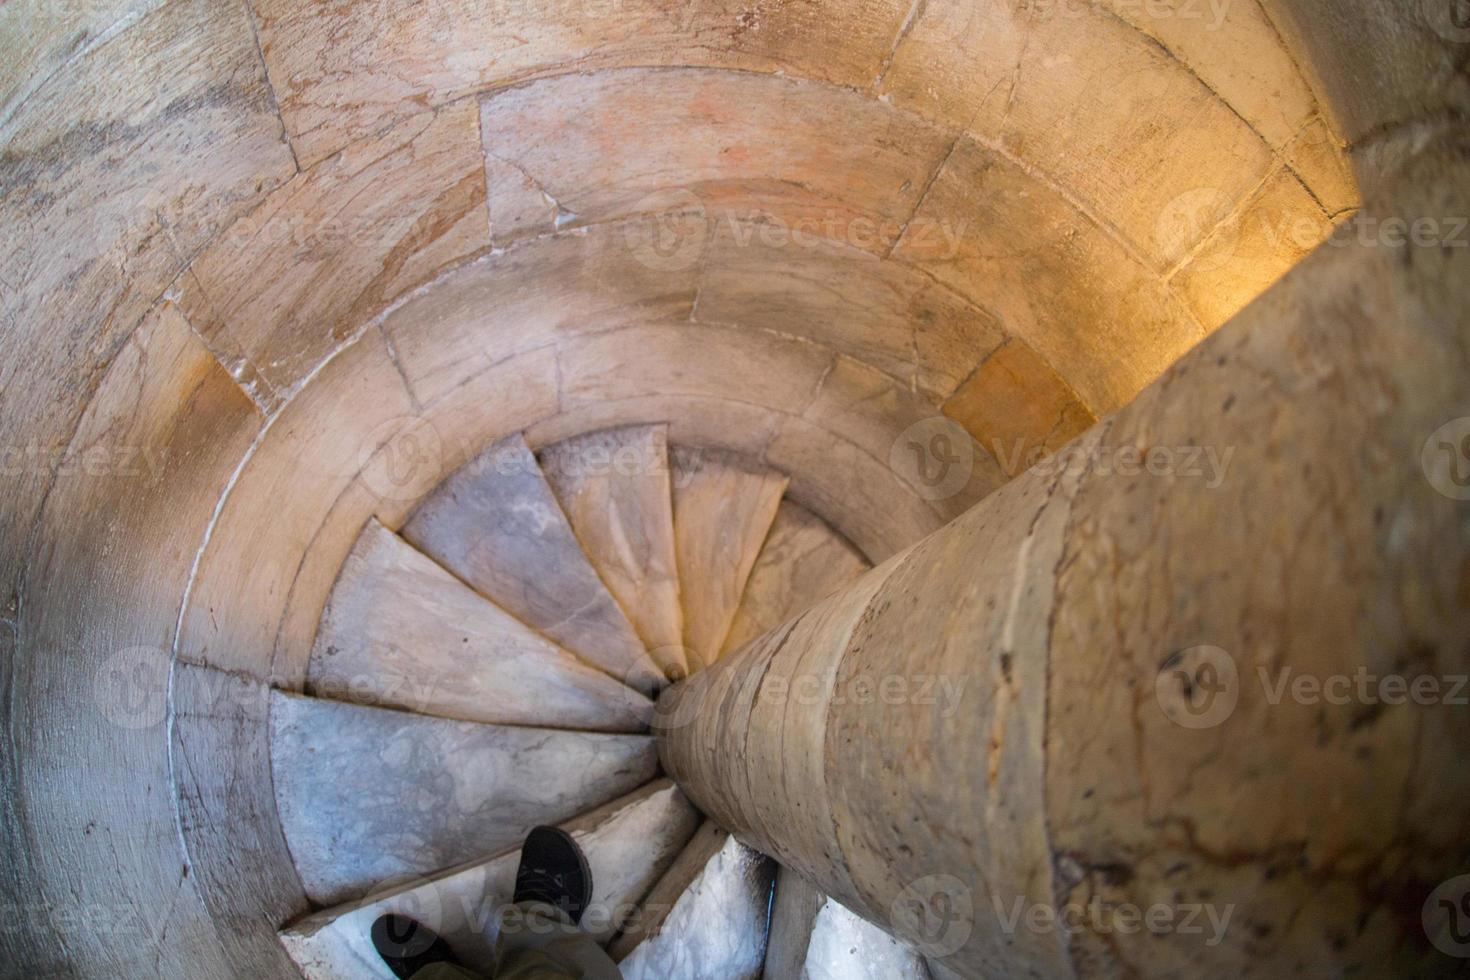 pisa leaning tower internal stairway close up detail view photo